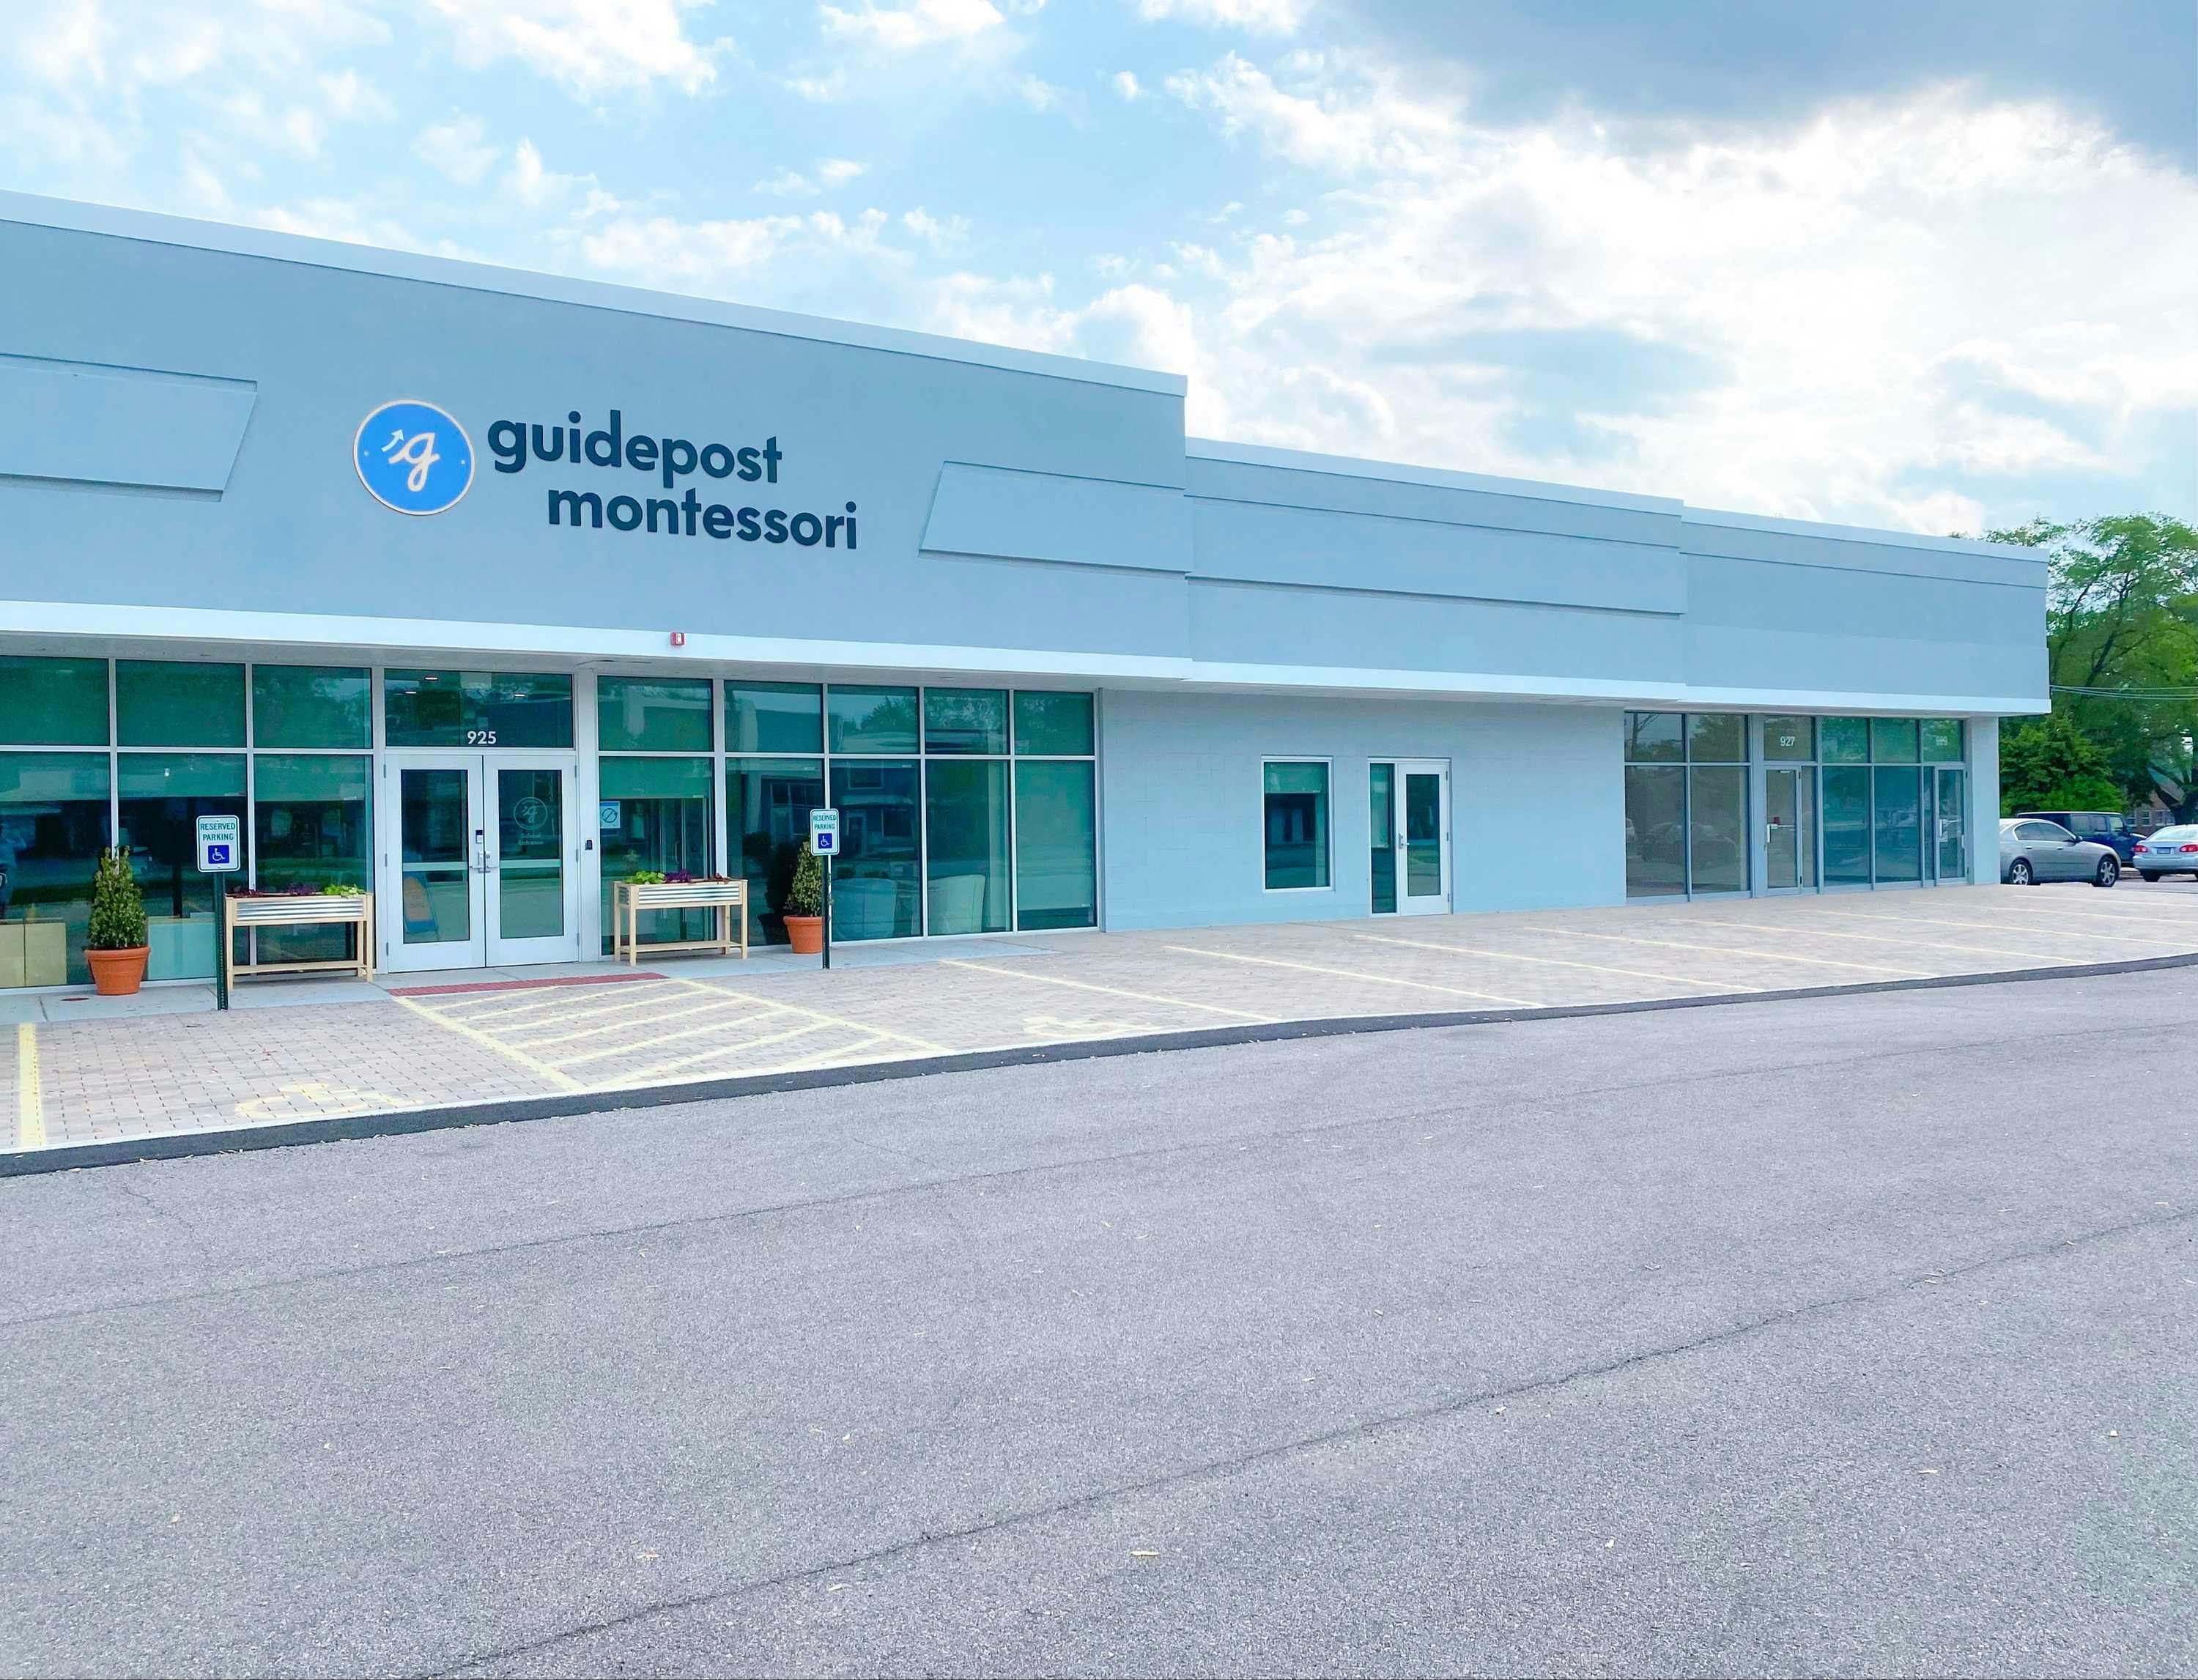 View of Guidepost Montessori at Downers Grove from the parking lot that shows the expansive facade of the gray building with a windowed entrance. Some handicap parking spots reside out front and the corner of the building is all windowed. A branded Guidepost Montessori sign sits on the building above the front entrance.